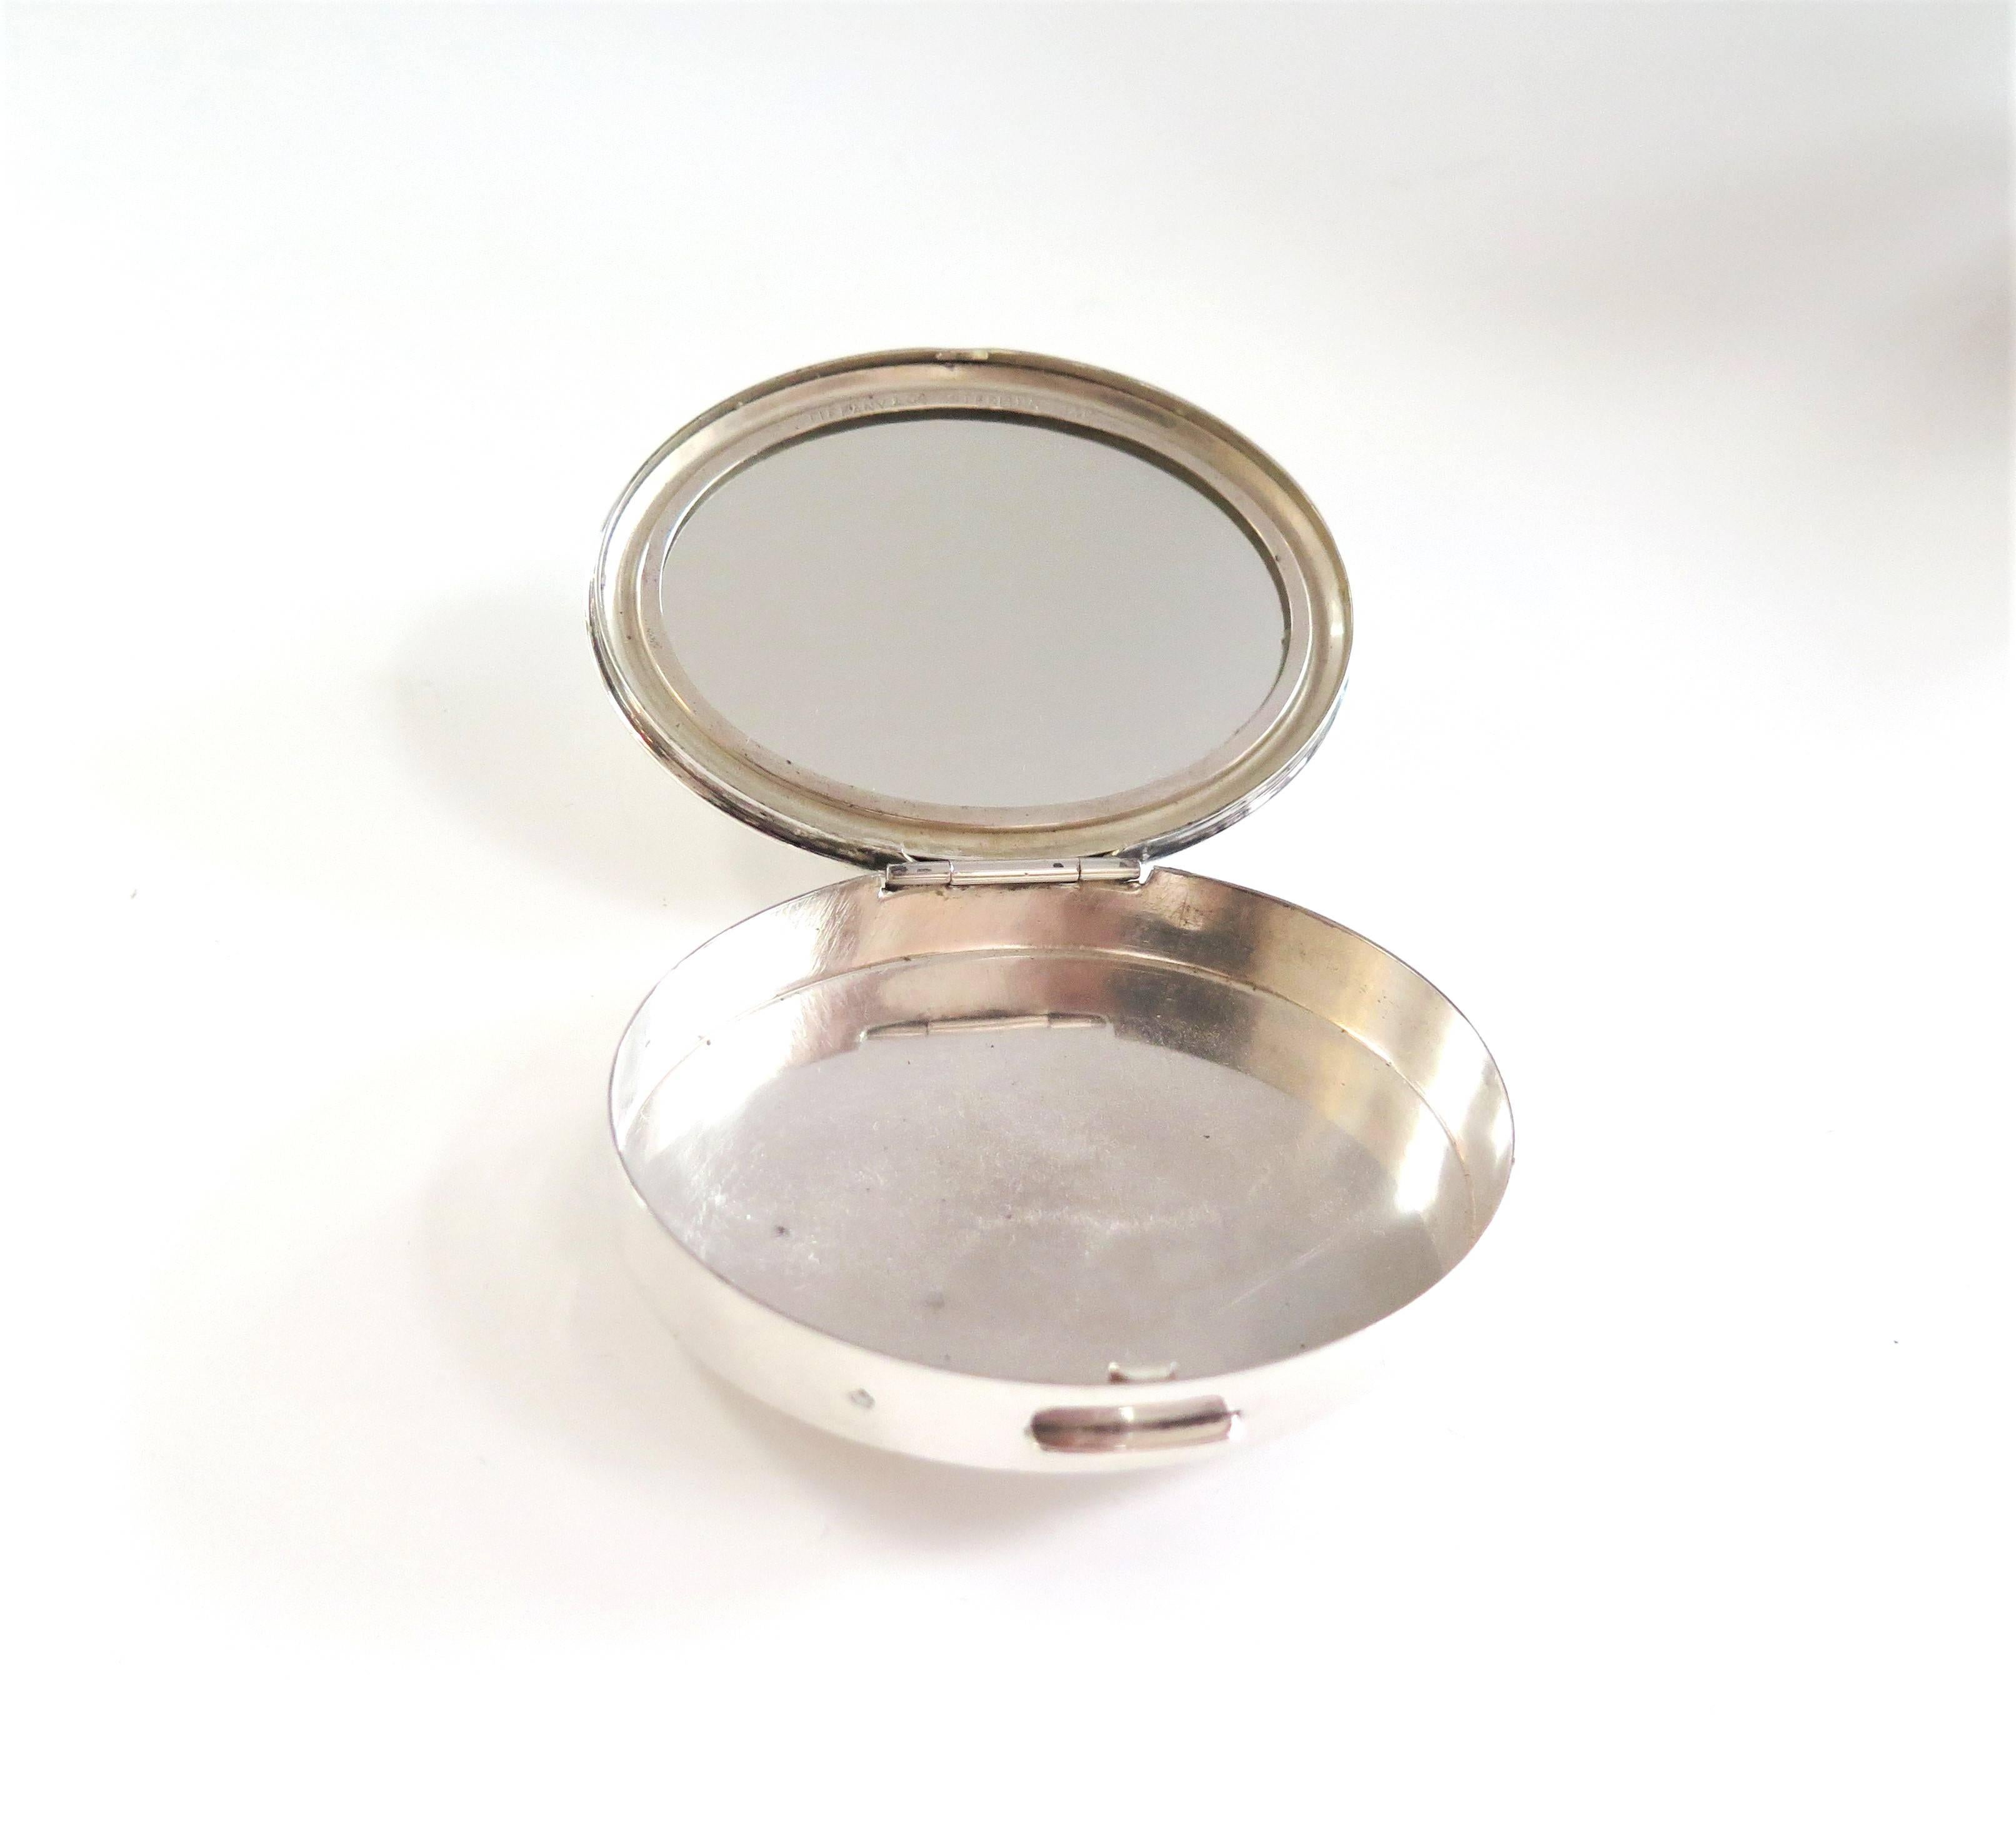 Tiffany & Co. Art Deco Sterling Silver, 14 Karat Gold, Rubies Compact circa 1930 In Good Condition For Sale In Bellmore, NY